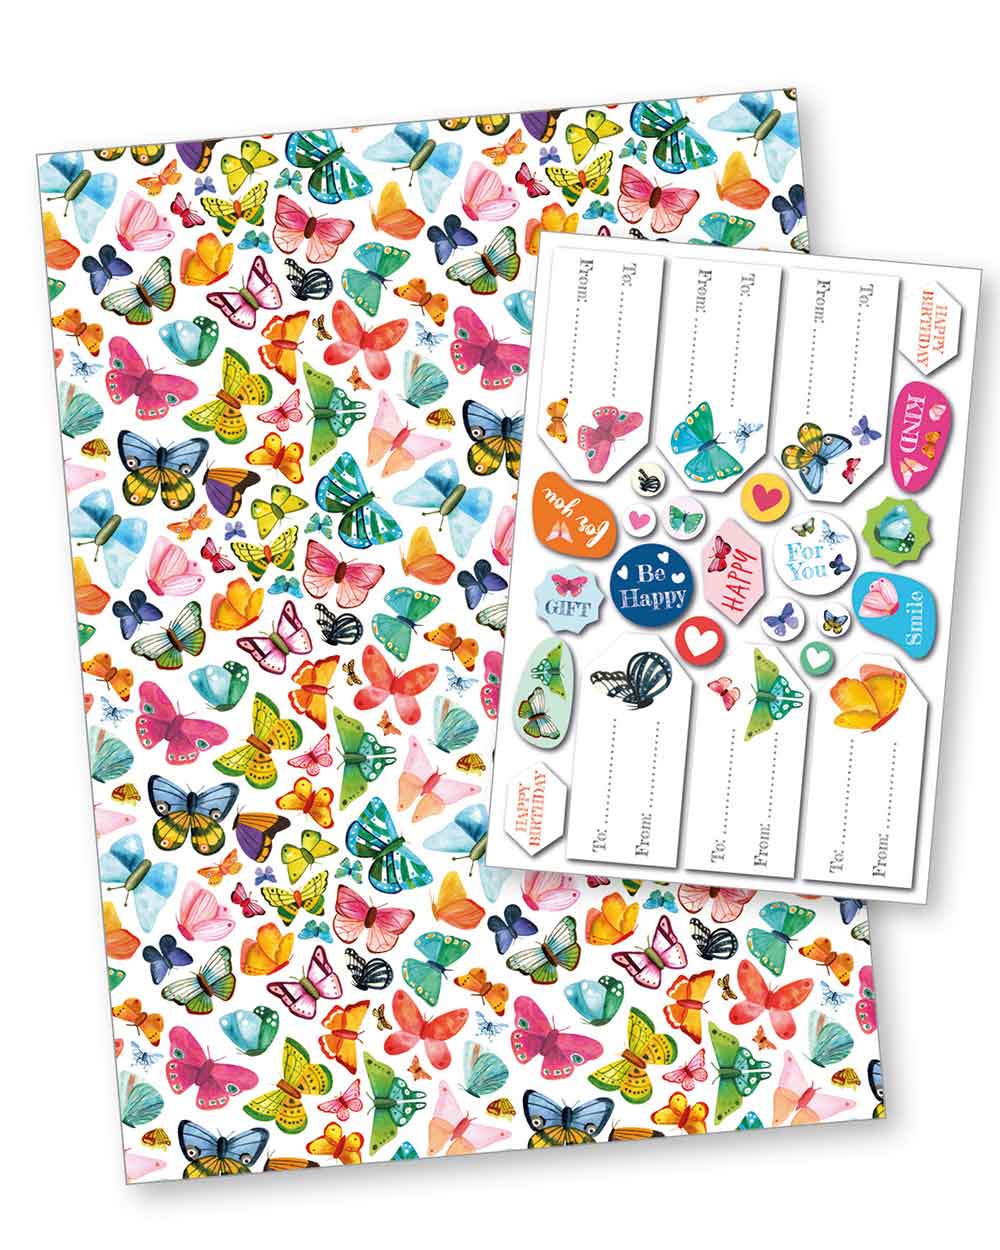 Gift Wrapping Paper Set Butterflies